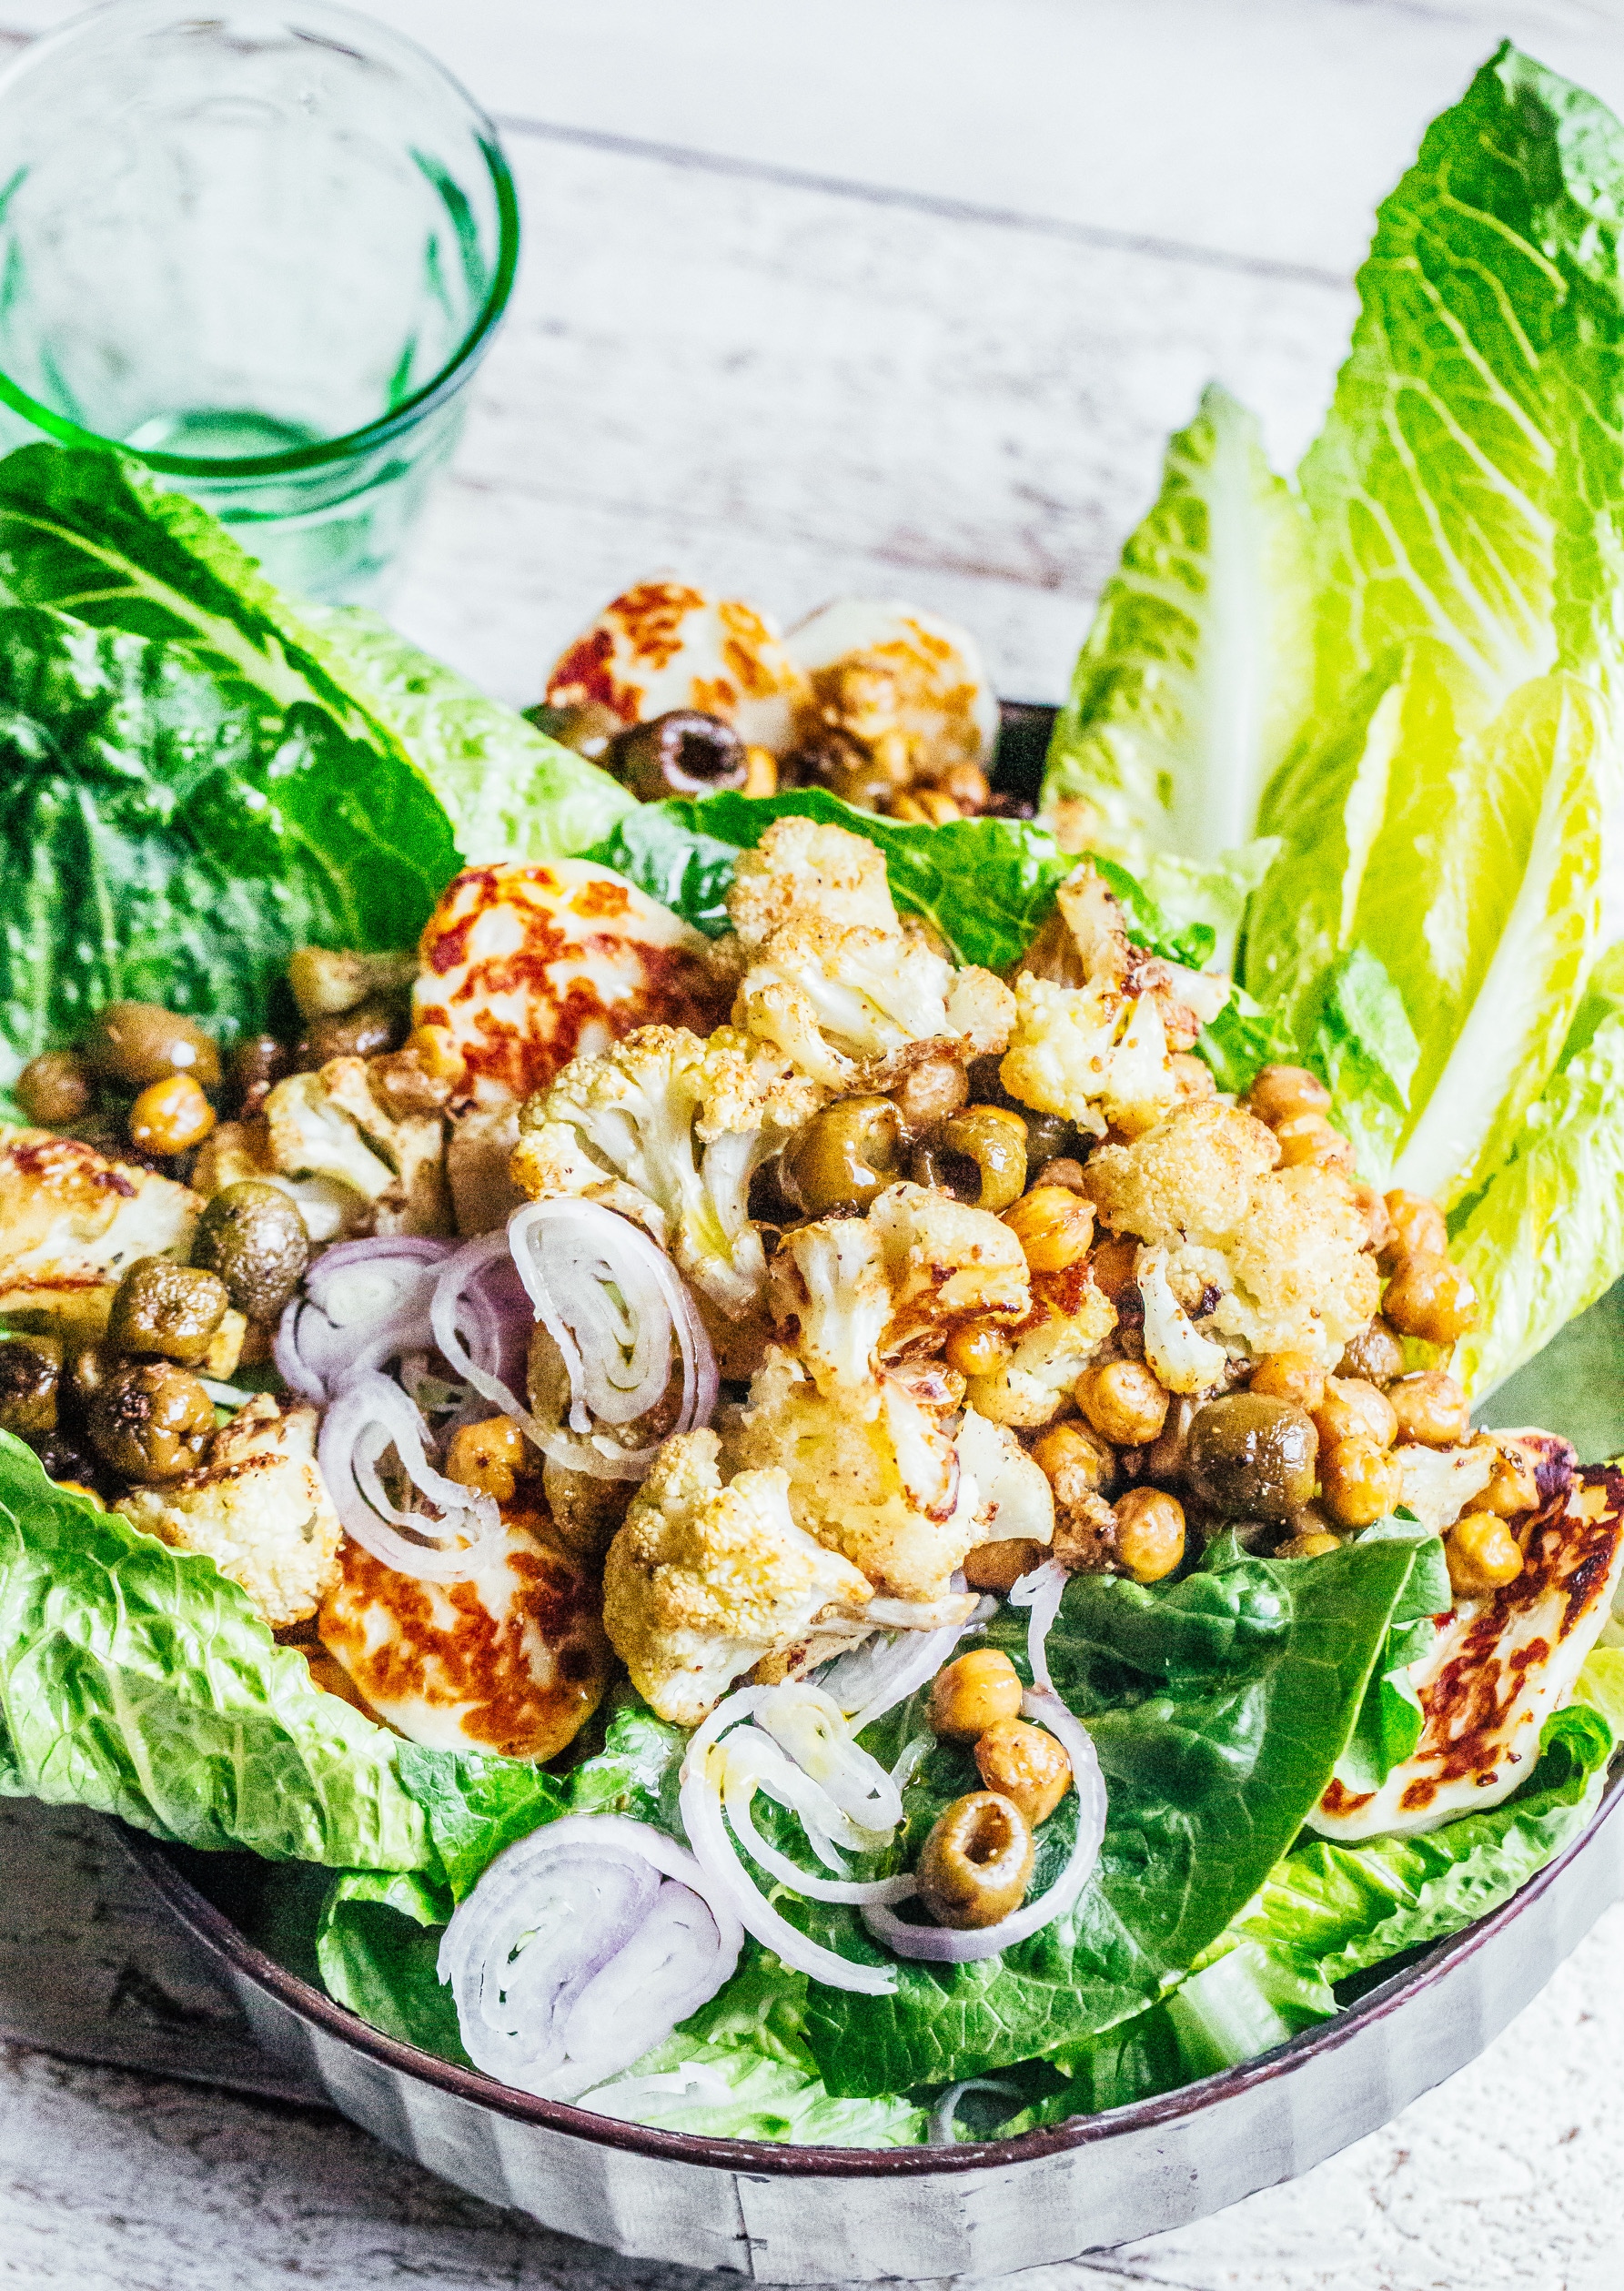 Spiced Cauliflower and Chickpea Salad with Crushed Olives